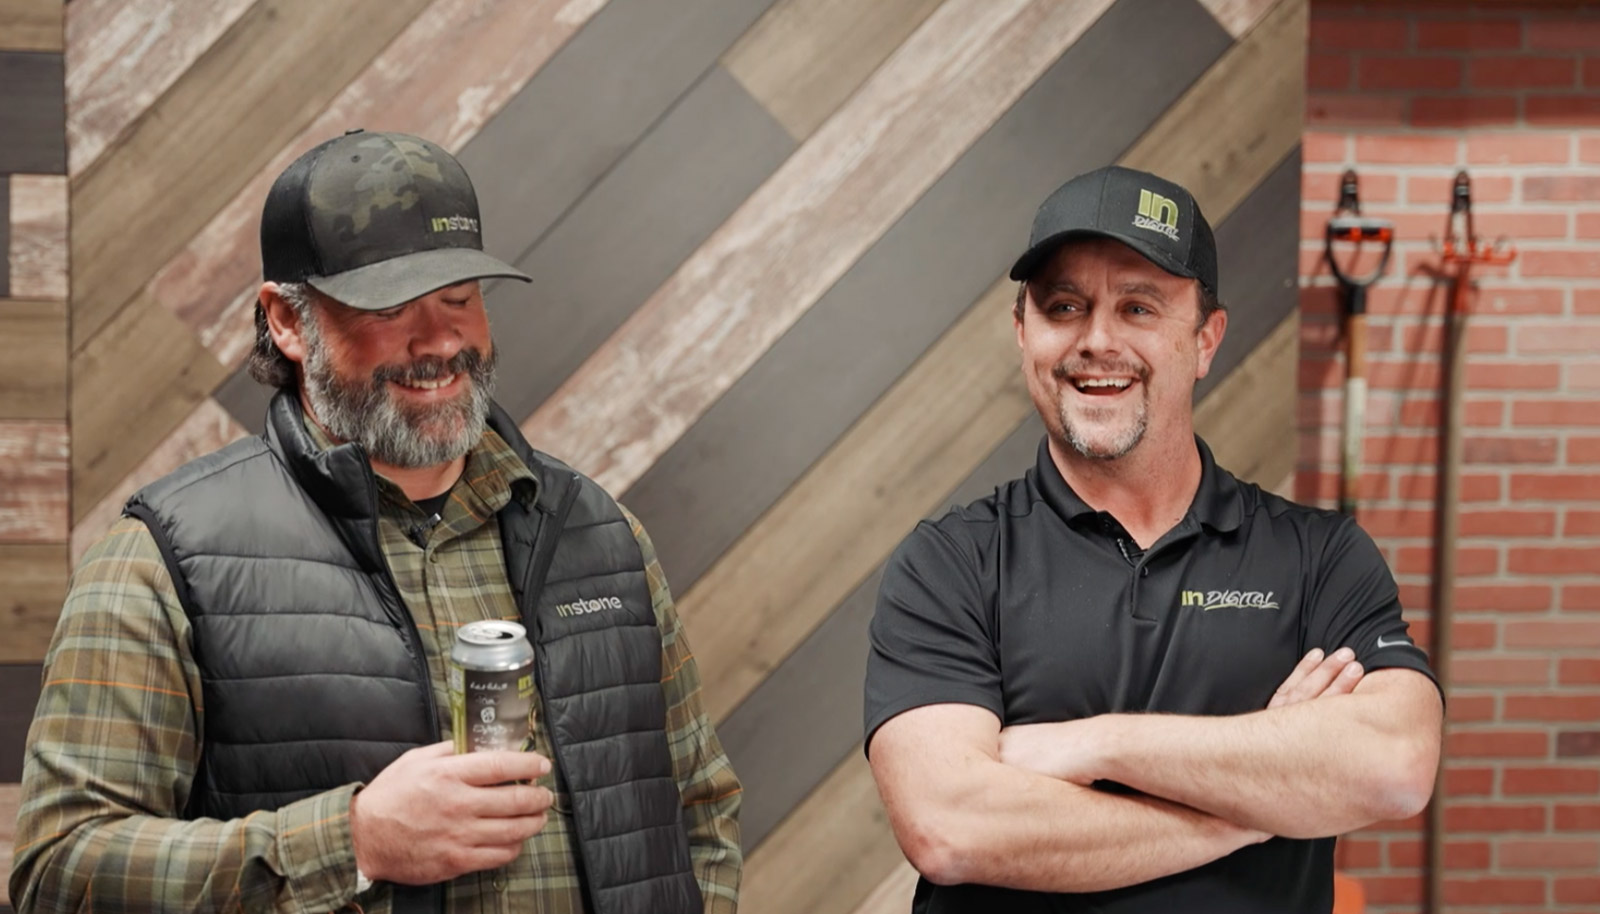 Instone Presents: InBuilding Design A New Online Show For Pros and the DIYers